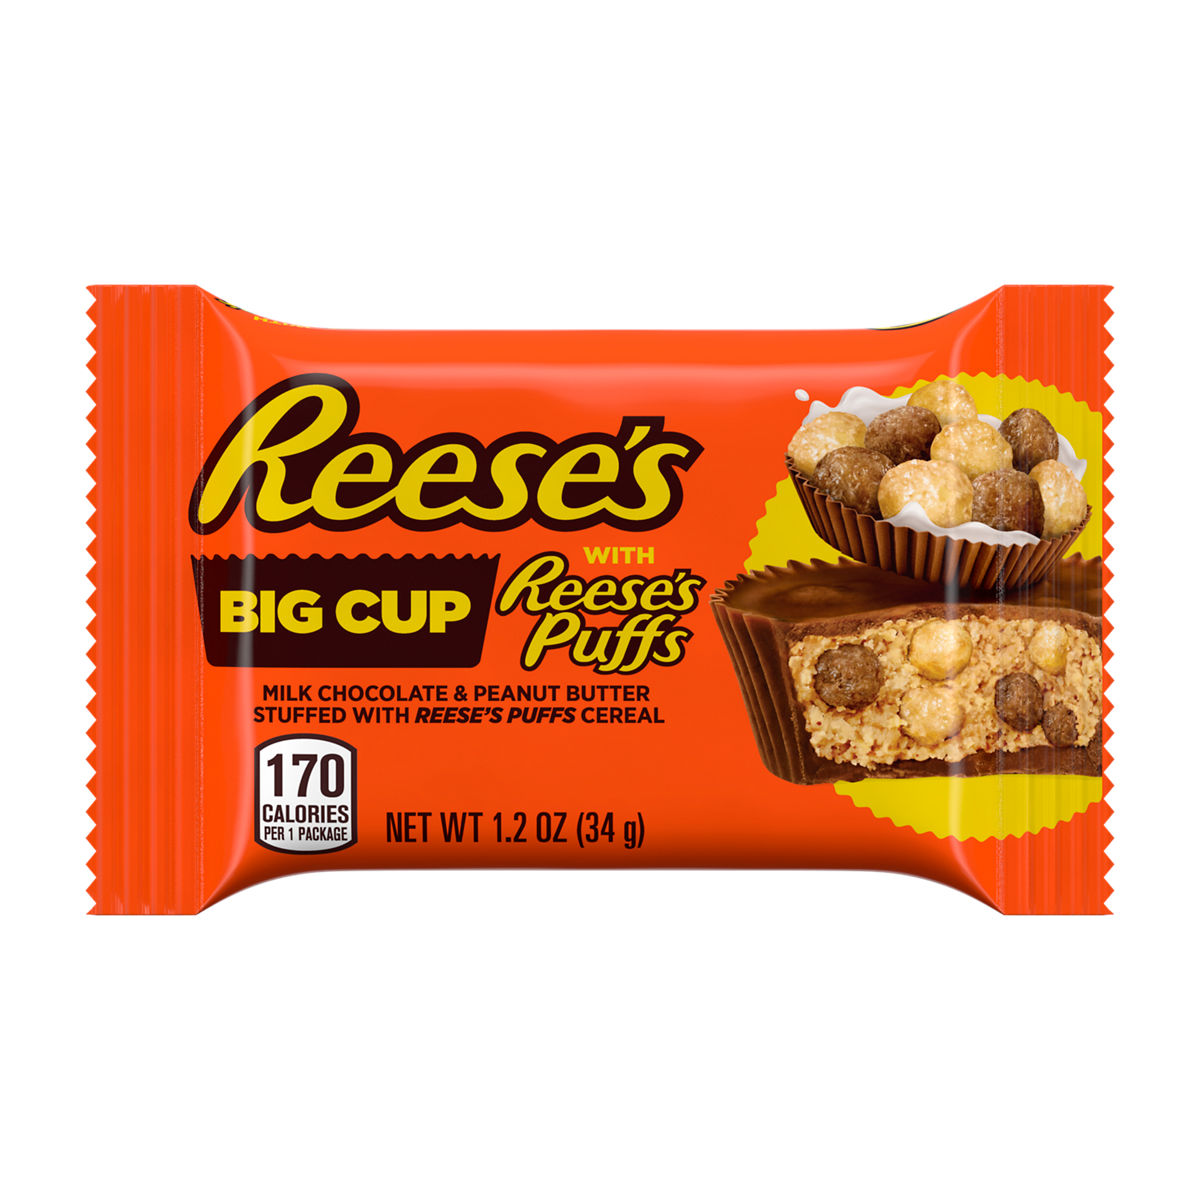 Reese's Big Cup Stuffed with Reese's Puffs1.2oz 16ct